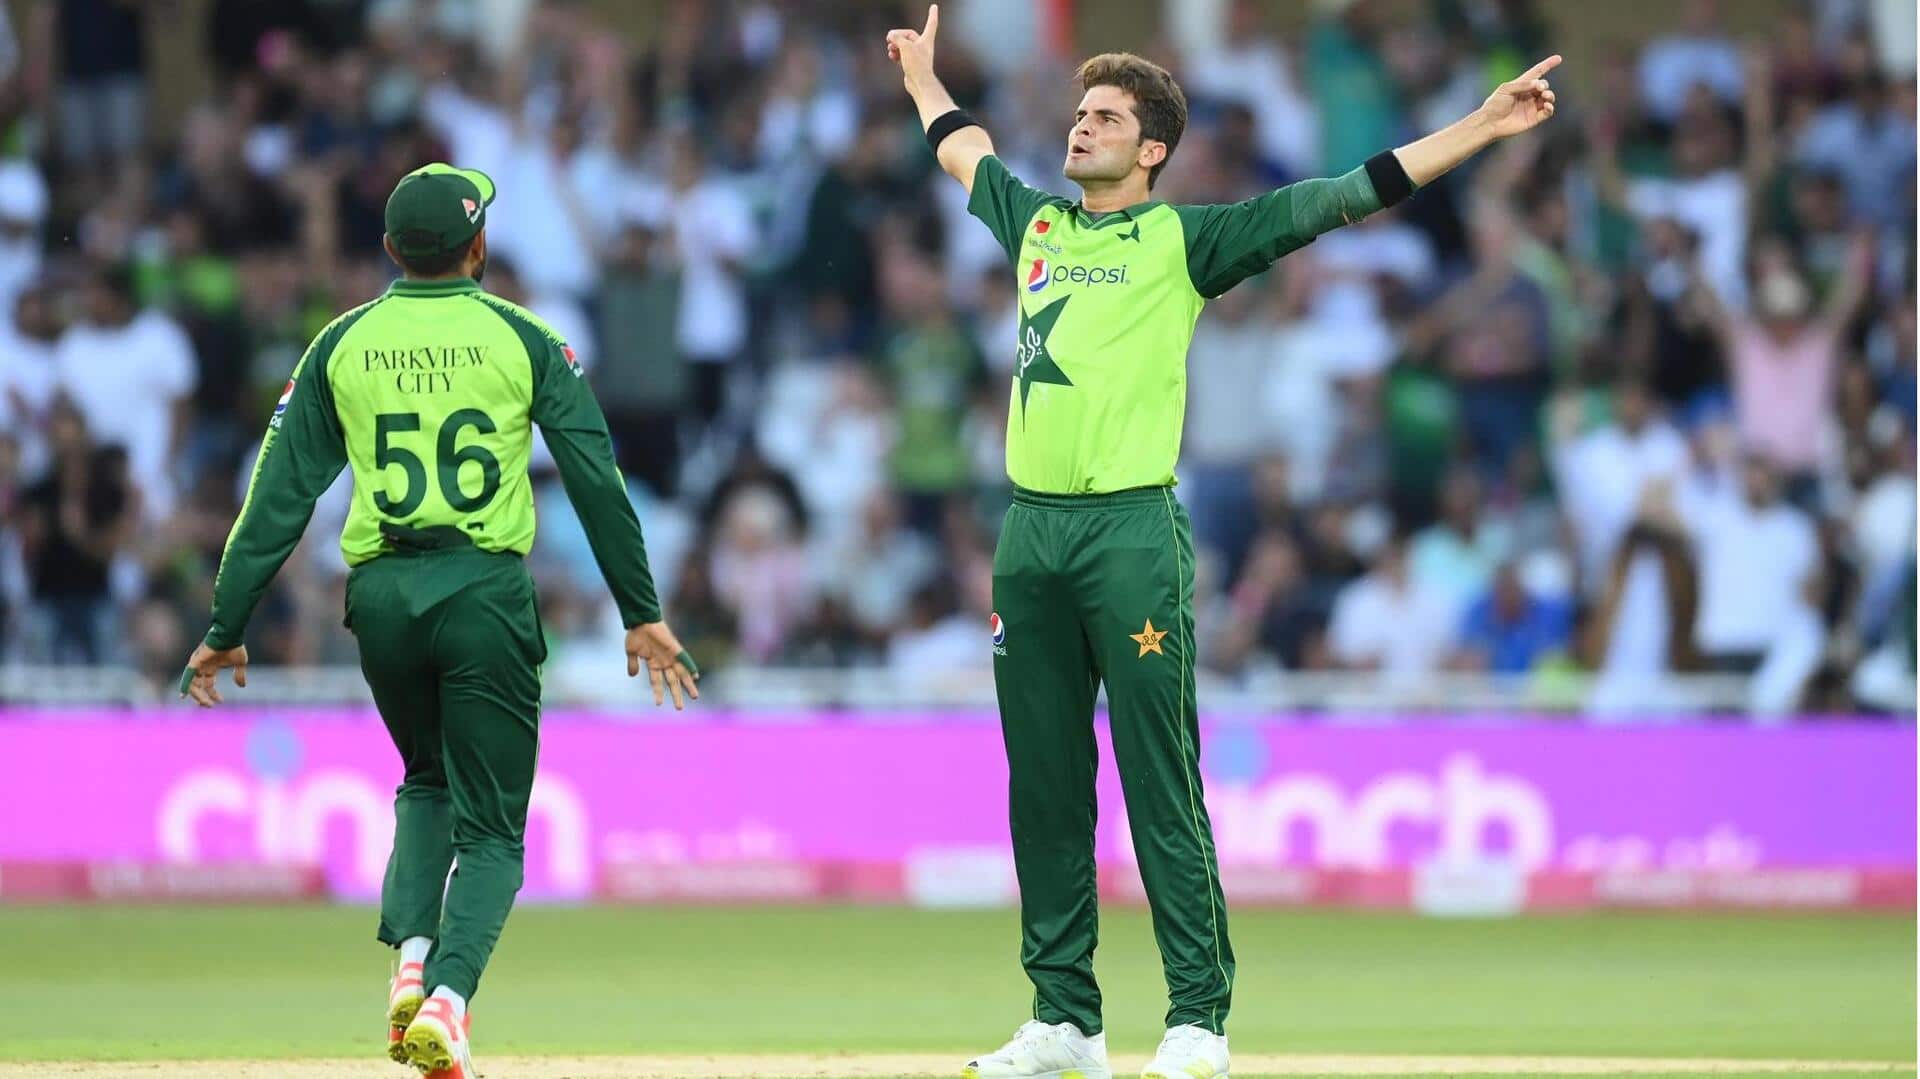 Lesser-known records of Shaheen Afridi in T20I cricket